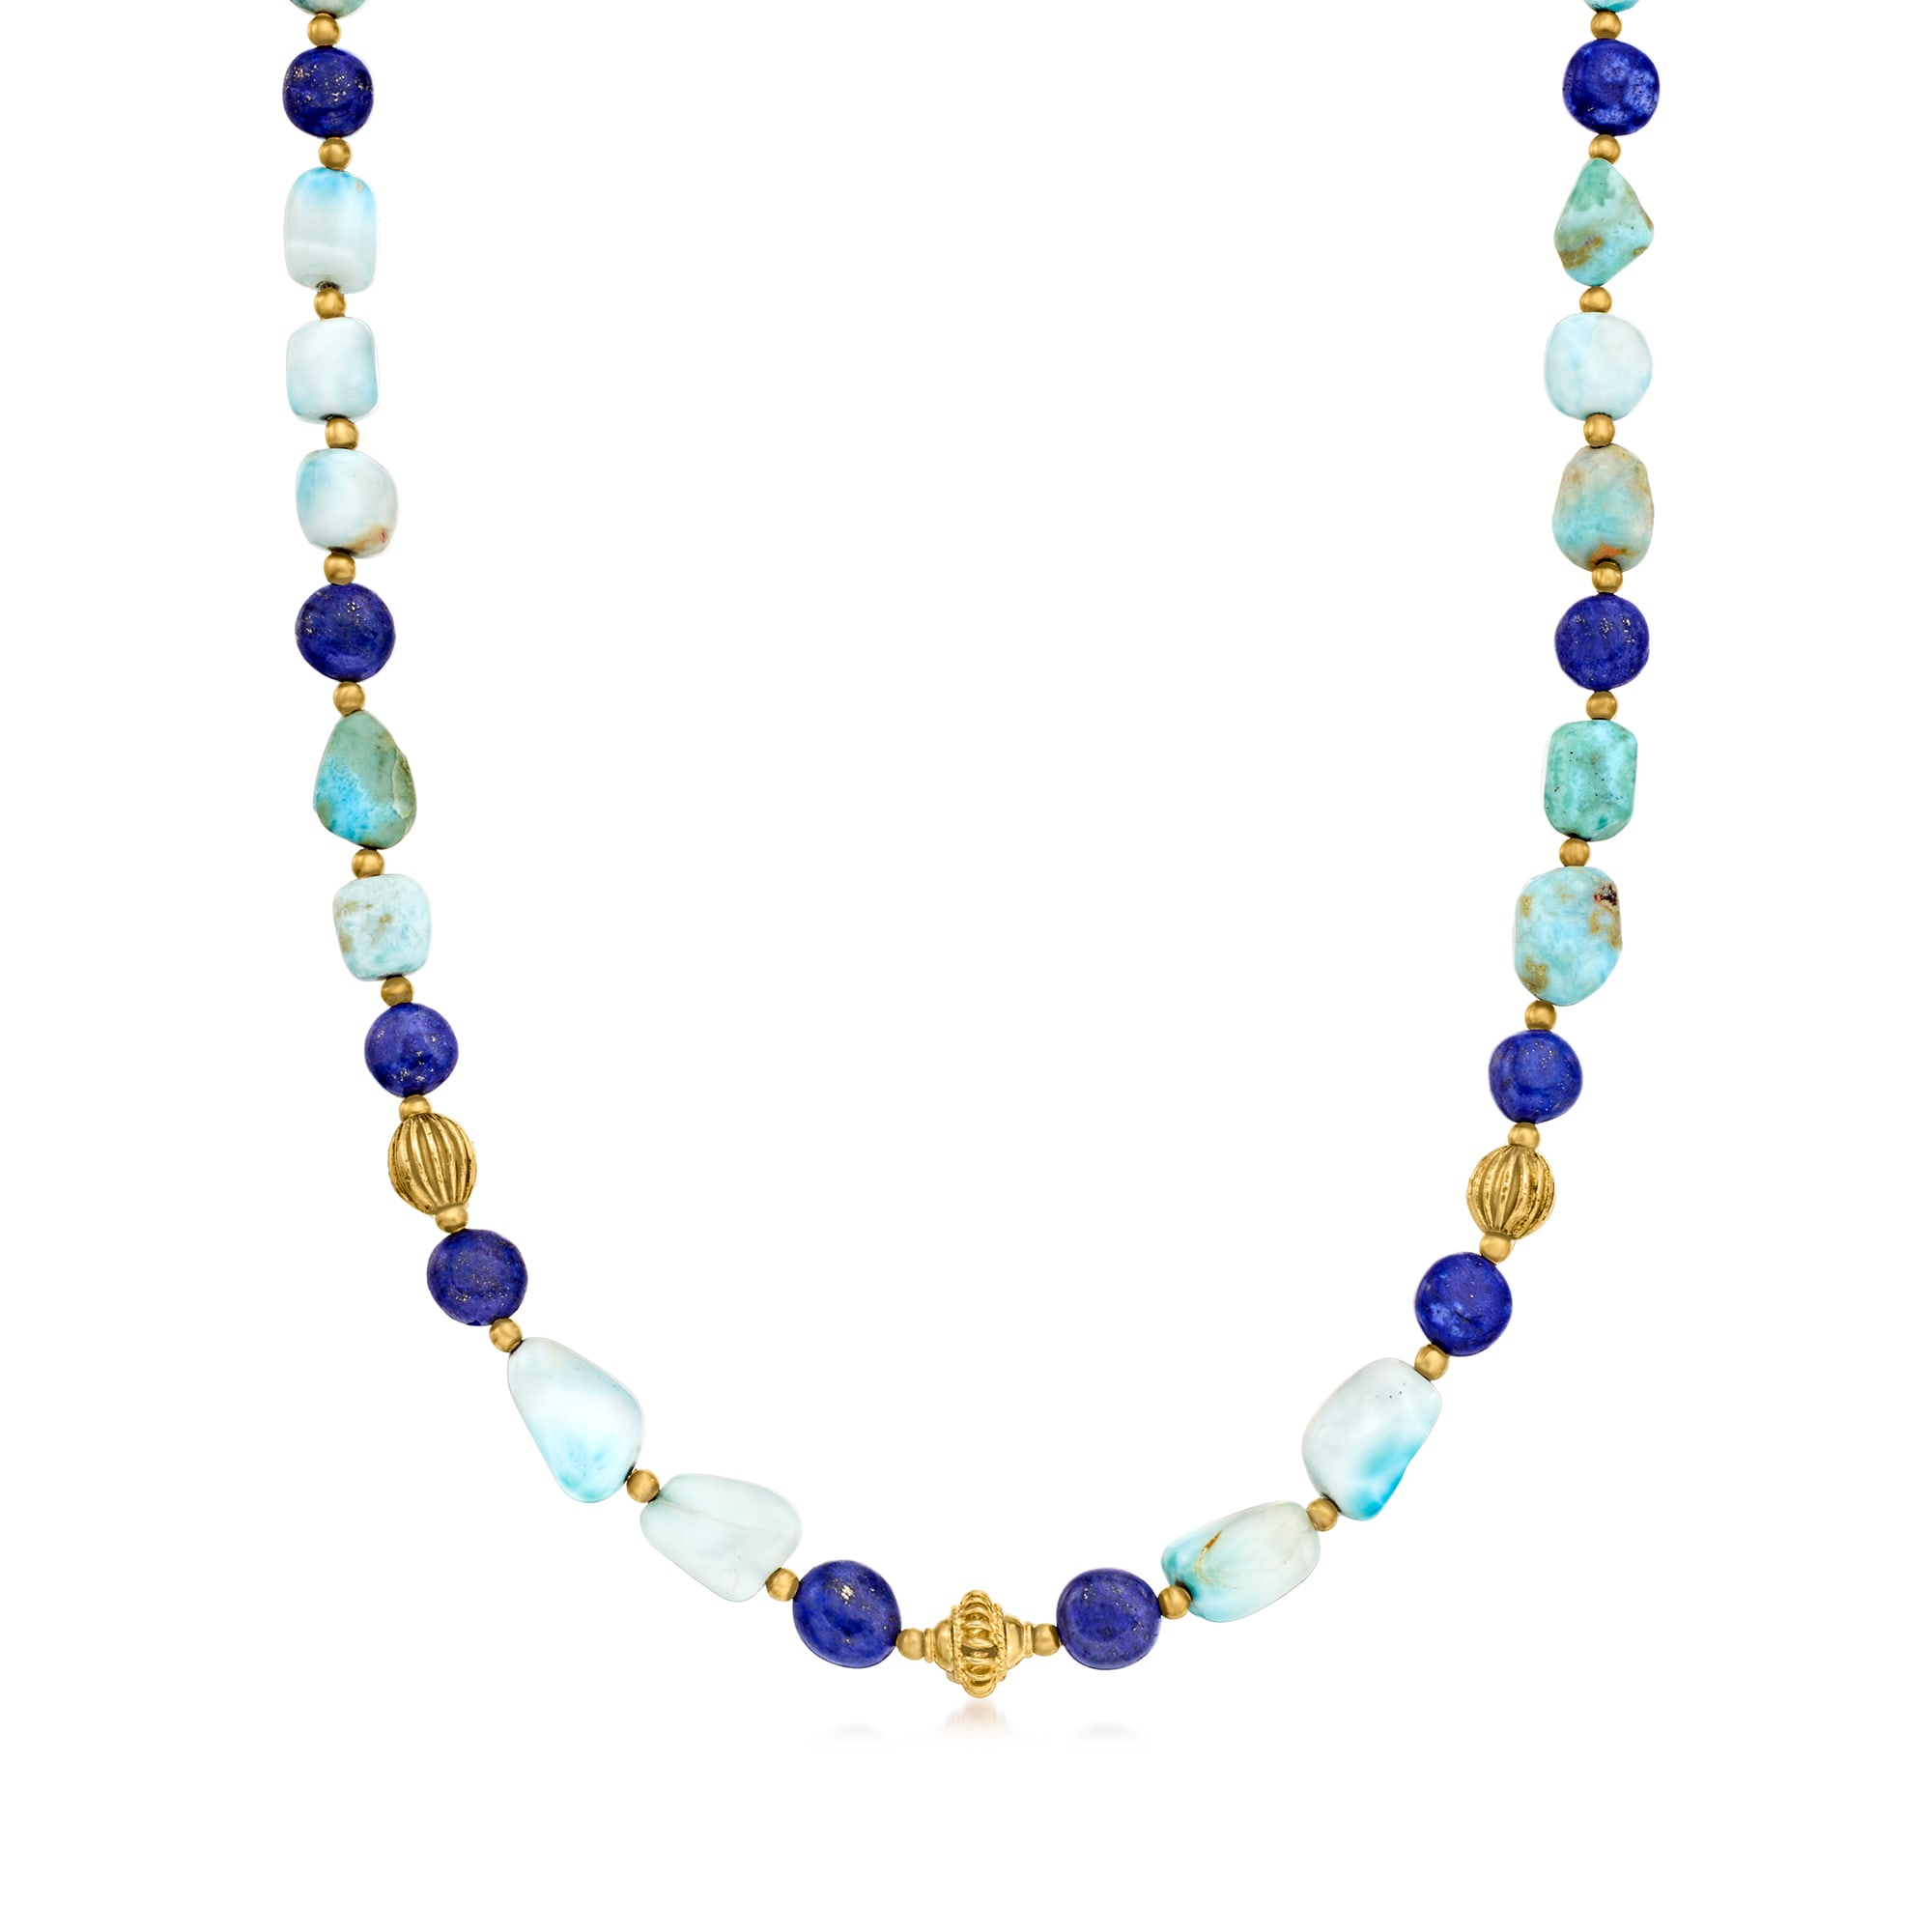 Larimar and Lapis Bead Necklace in 18kt Gold Over Sterling. 18